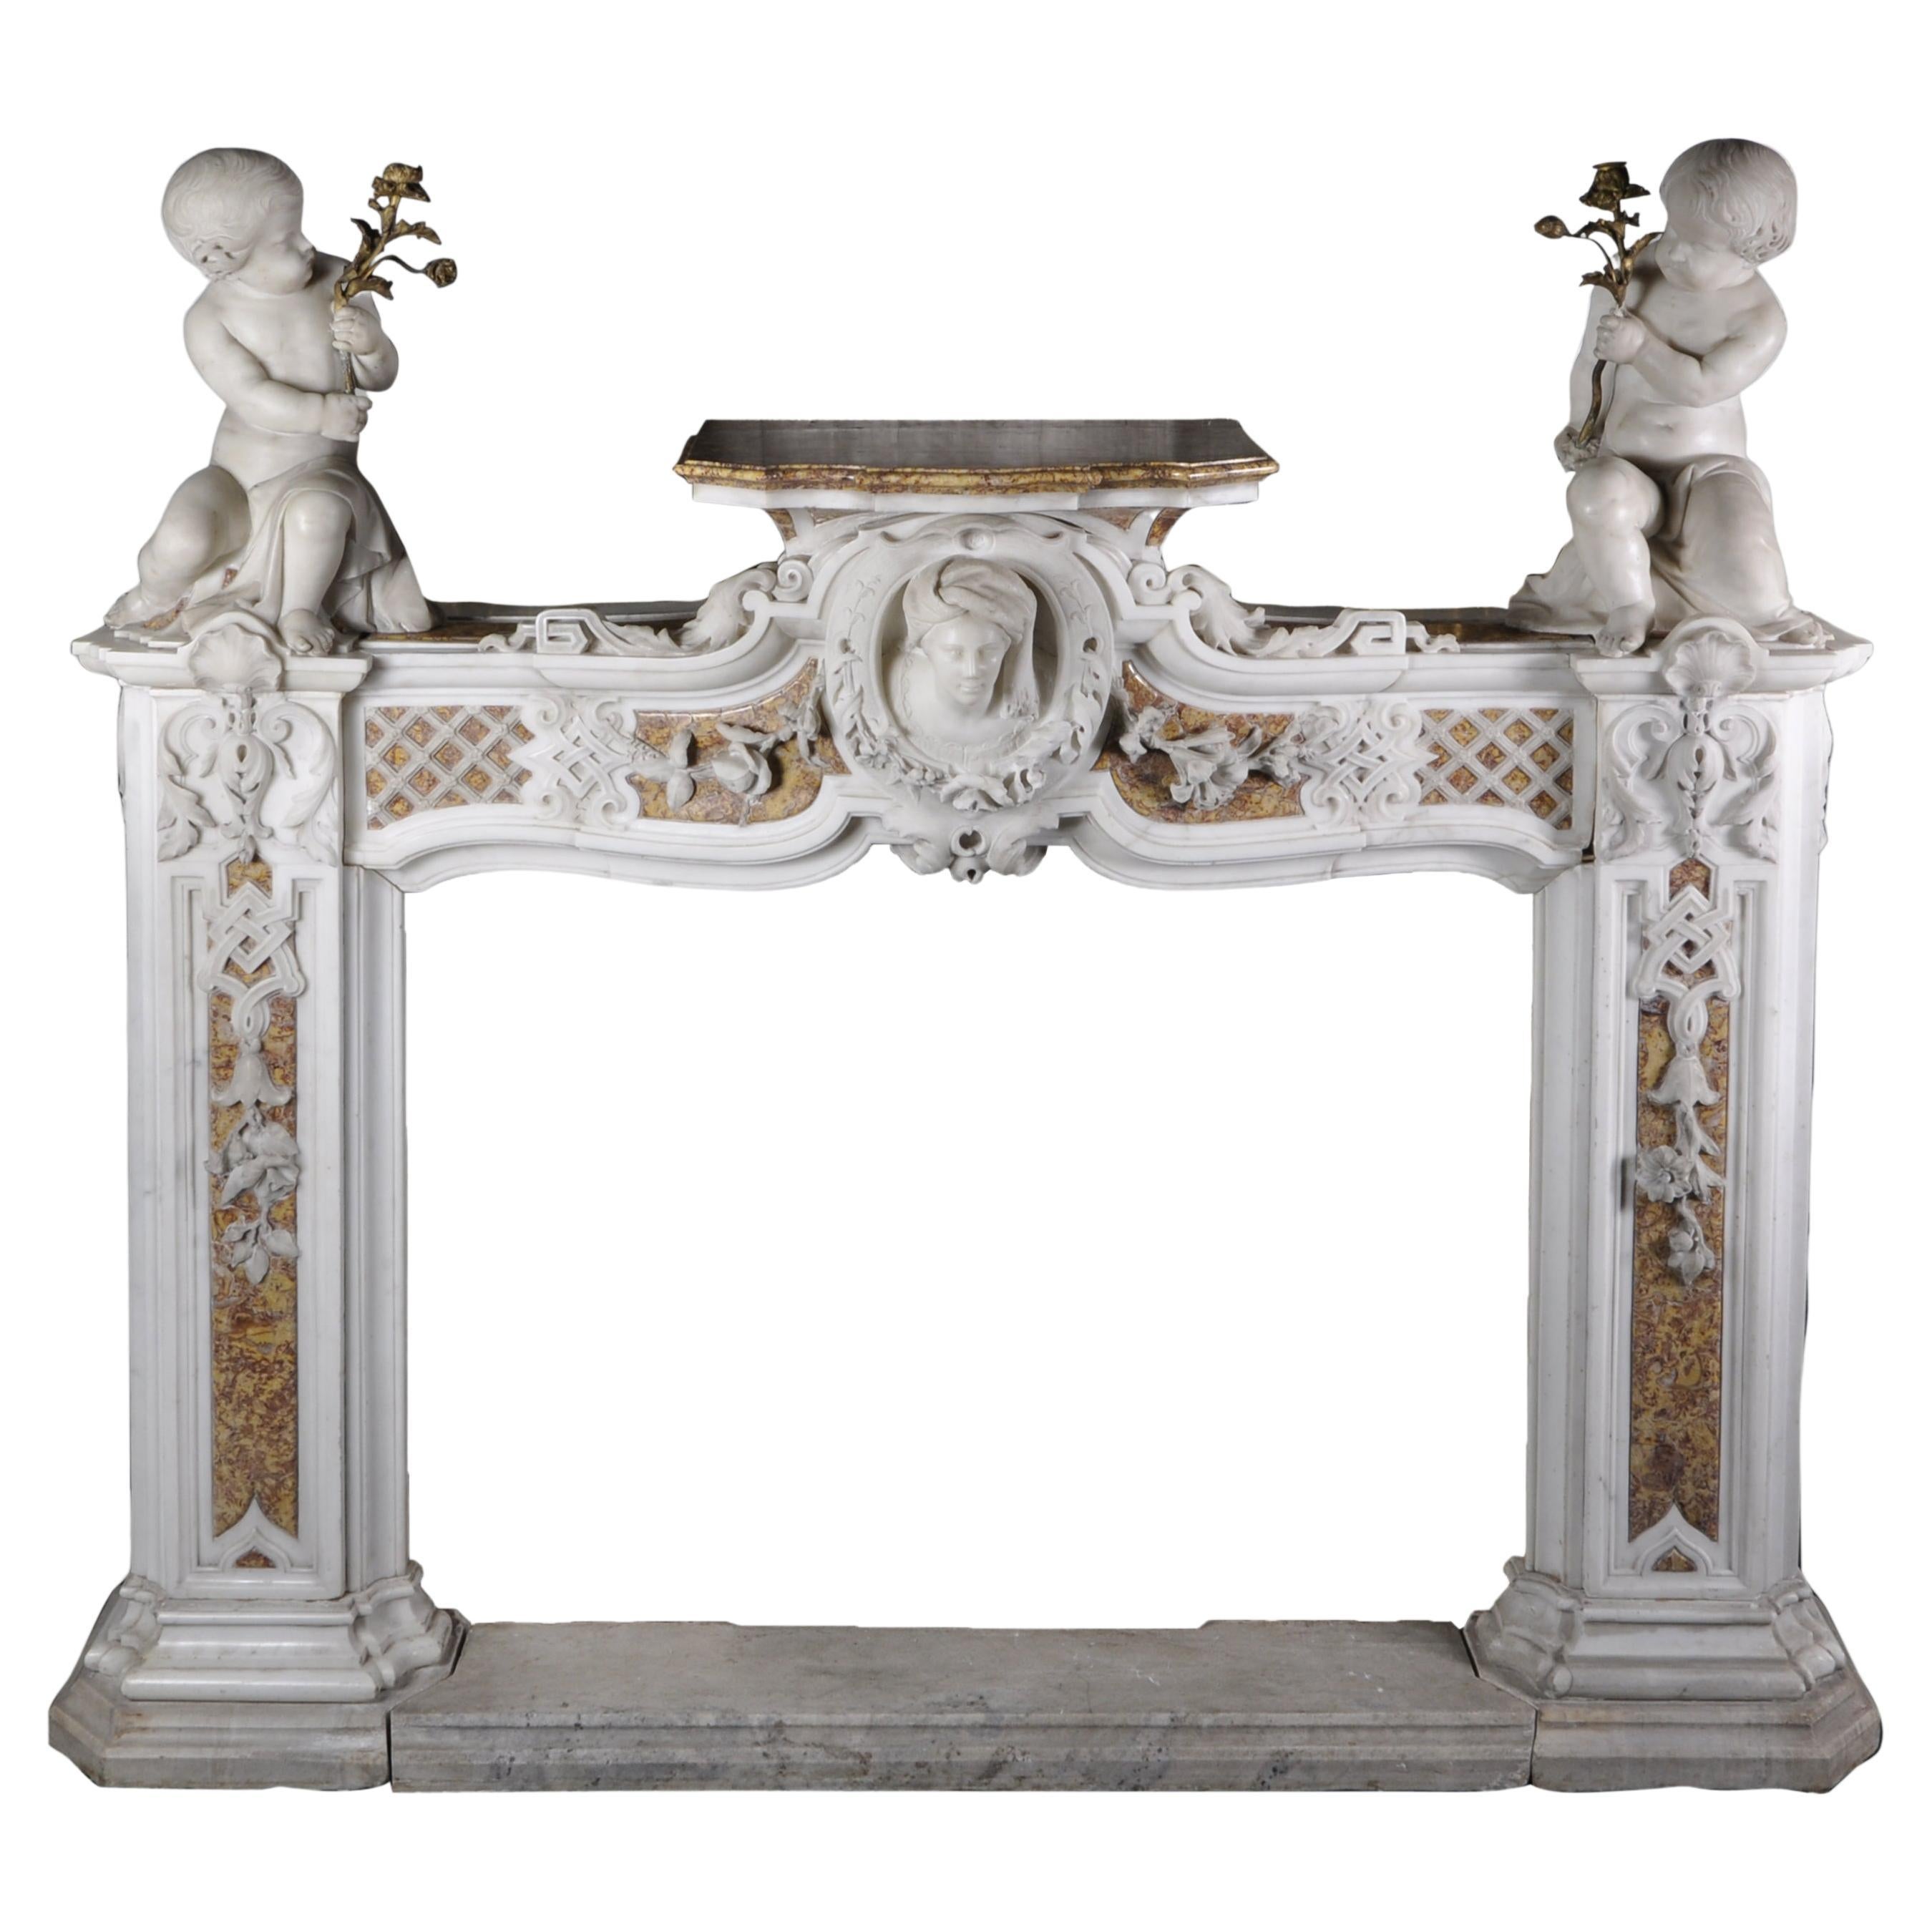 Late 18th century Statuary and Brocatelle marble fireplace with putti For Sale